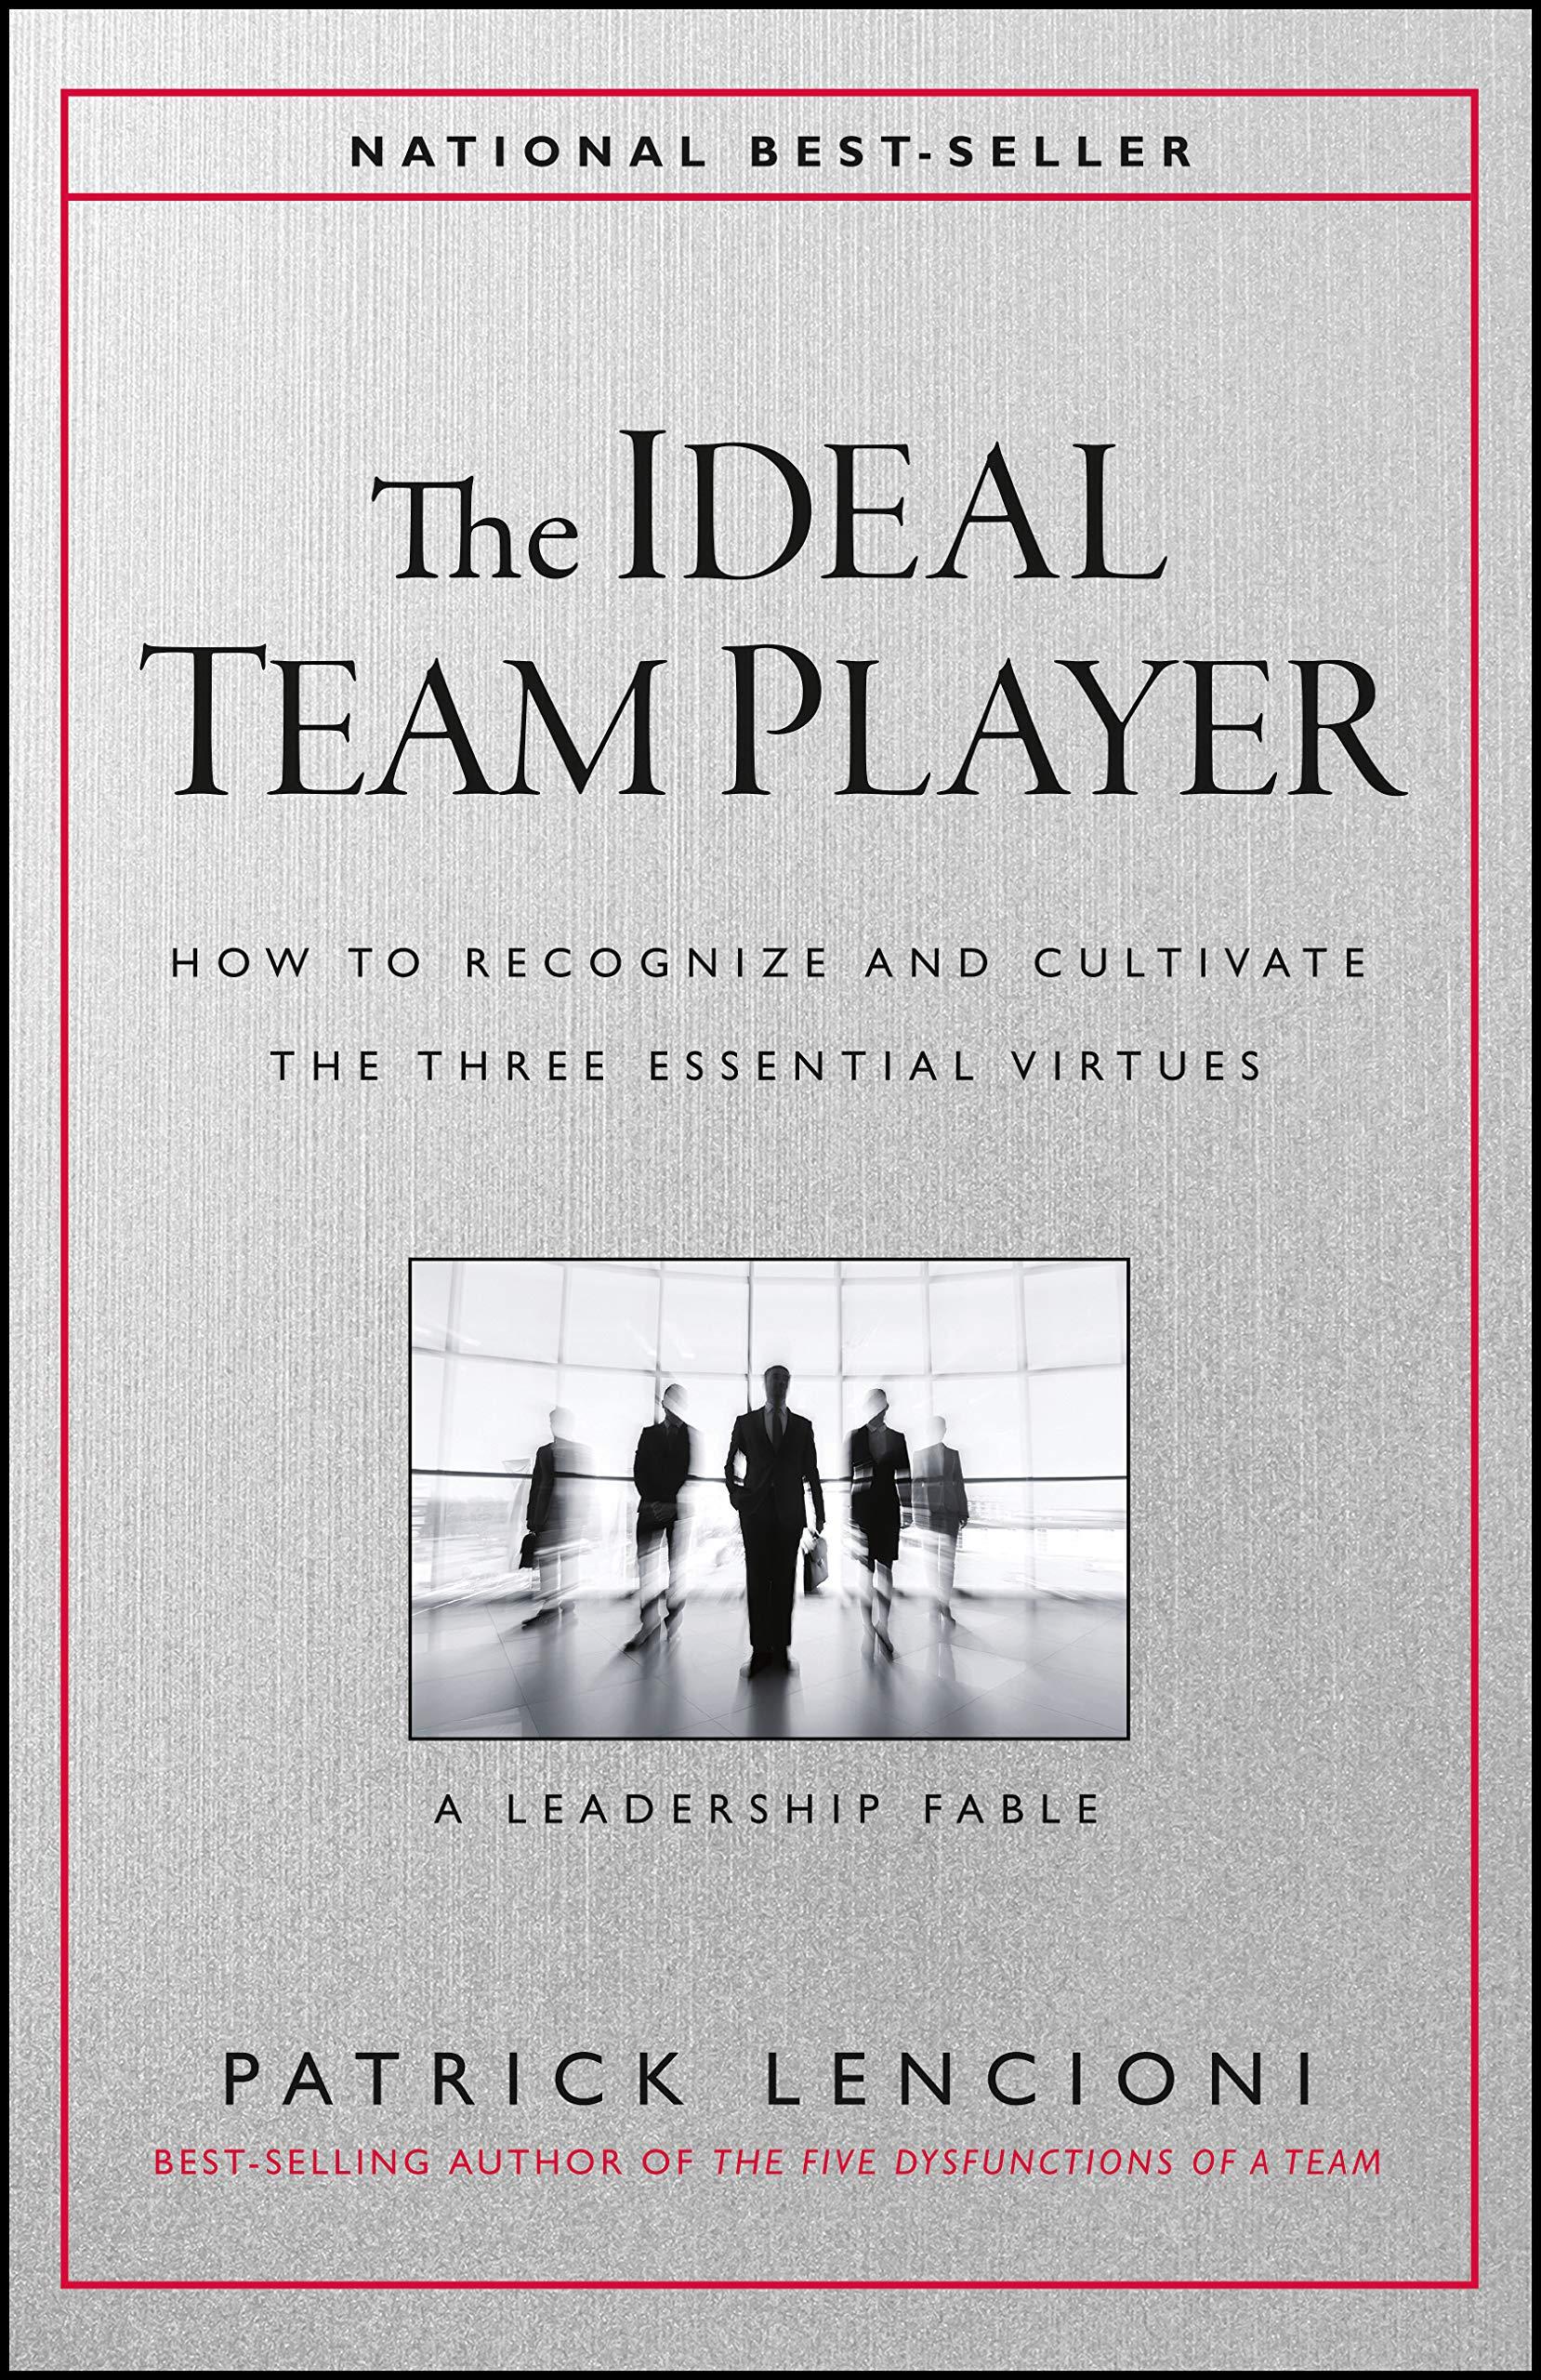 The Ideal Team Player How To Recognize And Cultivate The Three Essential Virtues